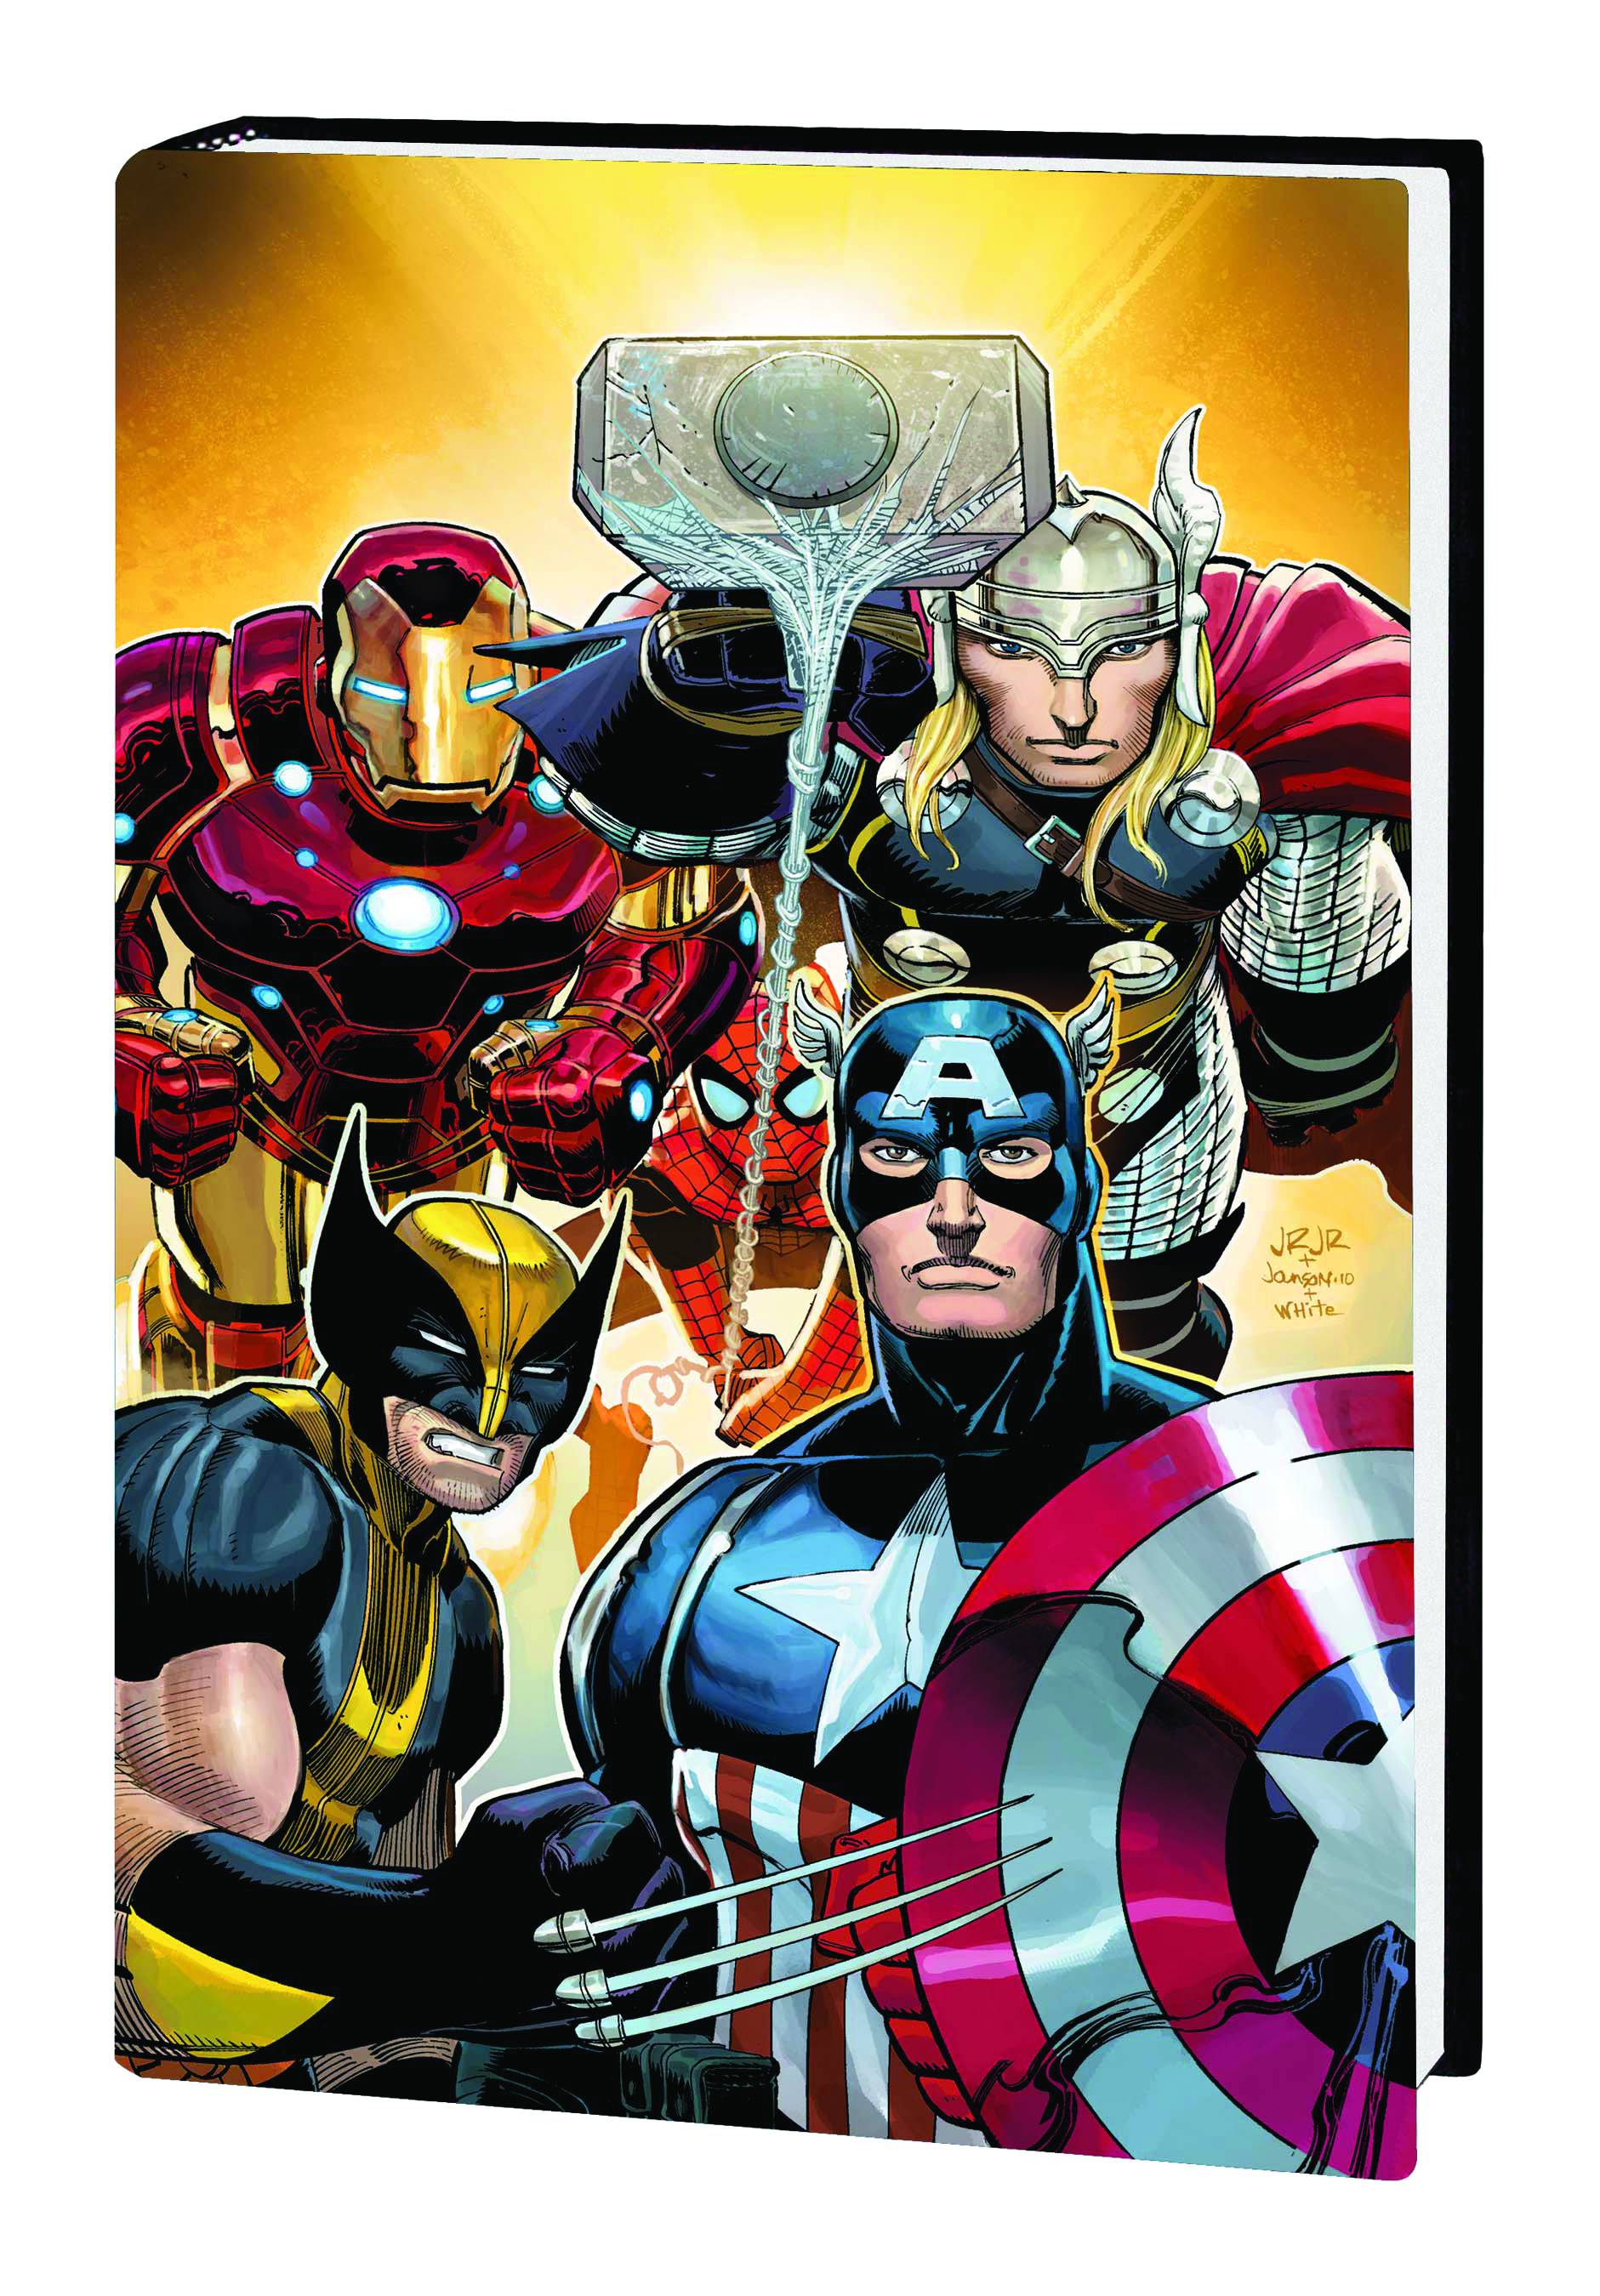 Avengers by Brian Michael Bendis